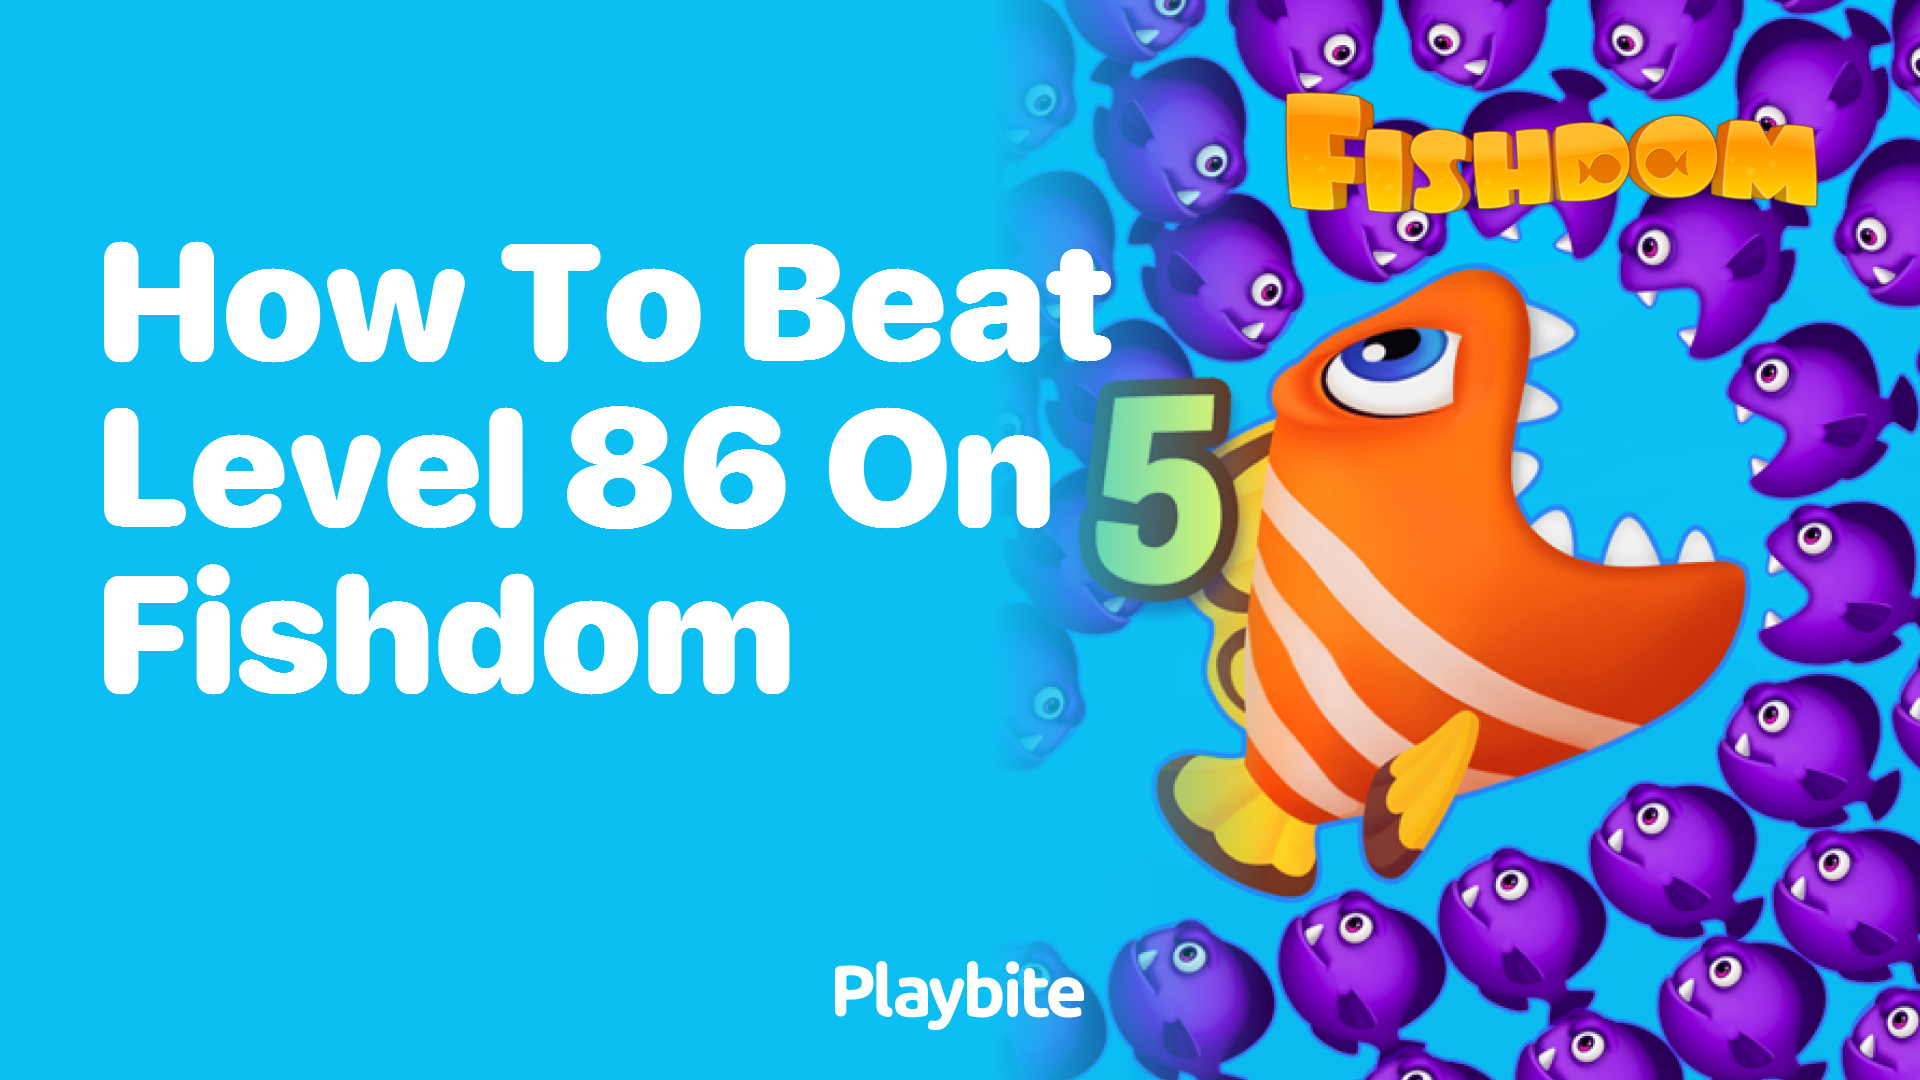 How to Beat Level 86 on Fishdom: A Simple Guide